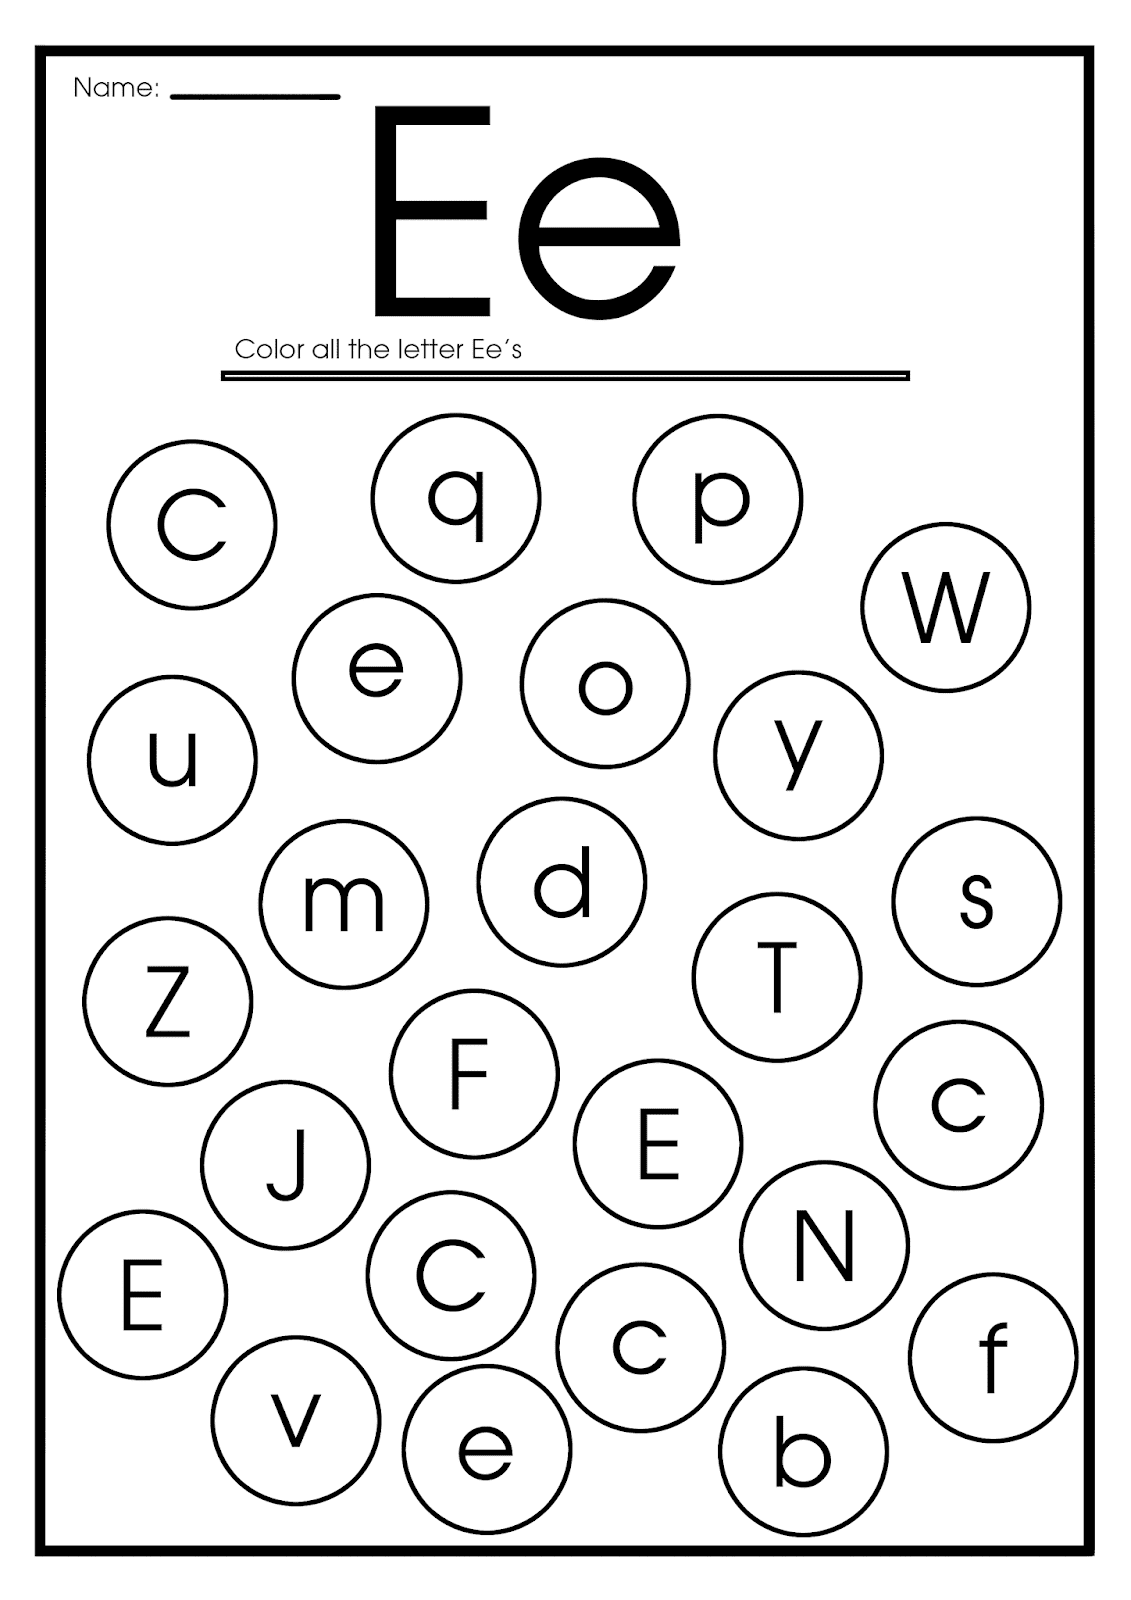 English for kids step by step letter e worksheets flash cards coloring pages